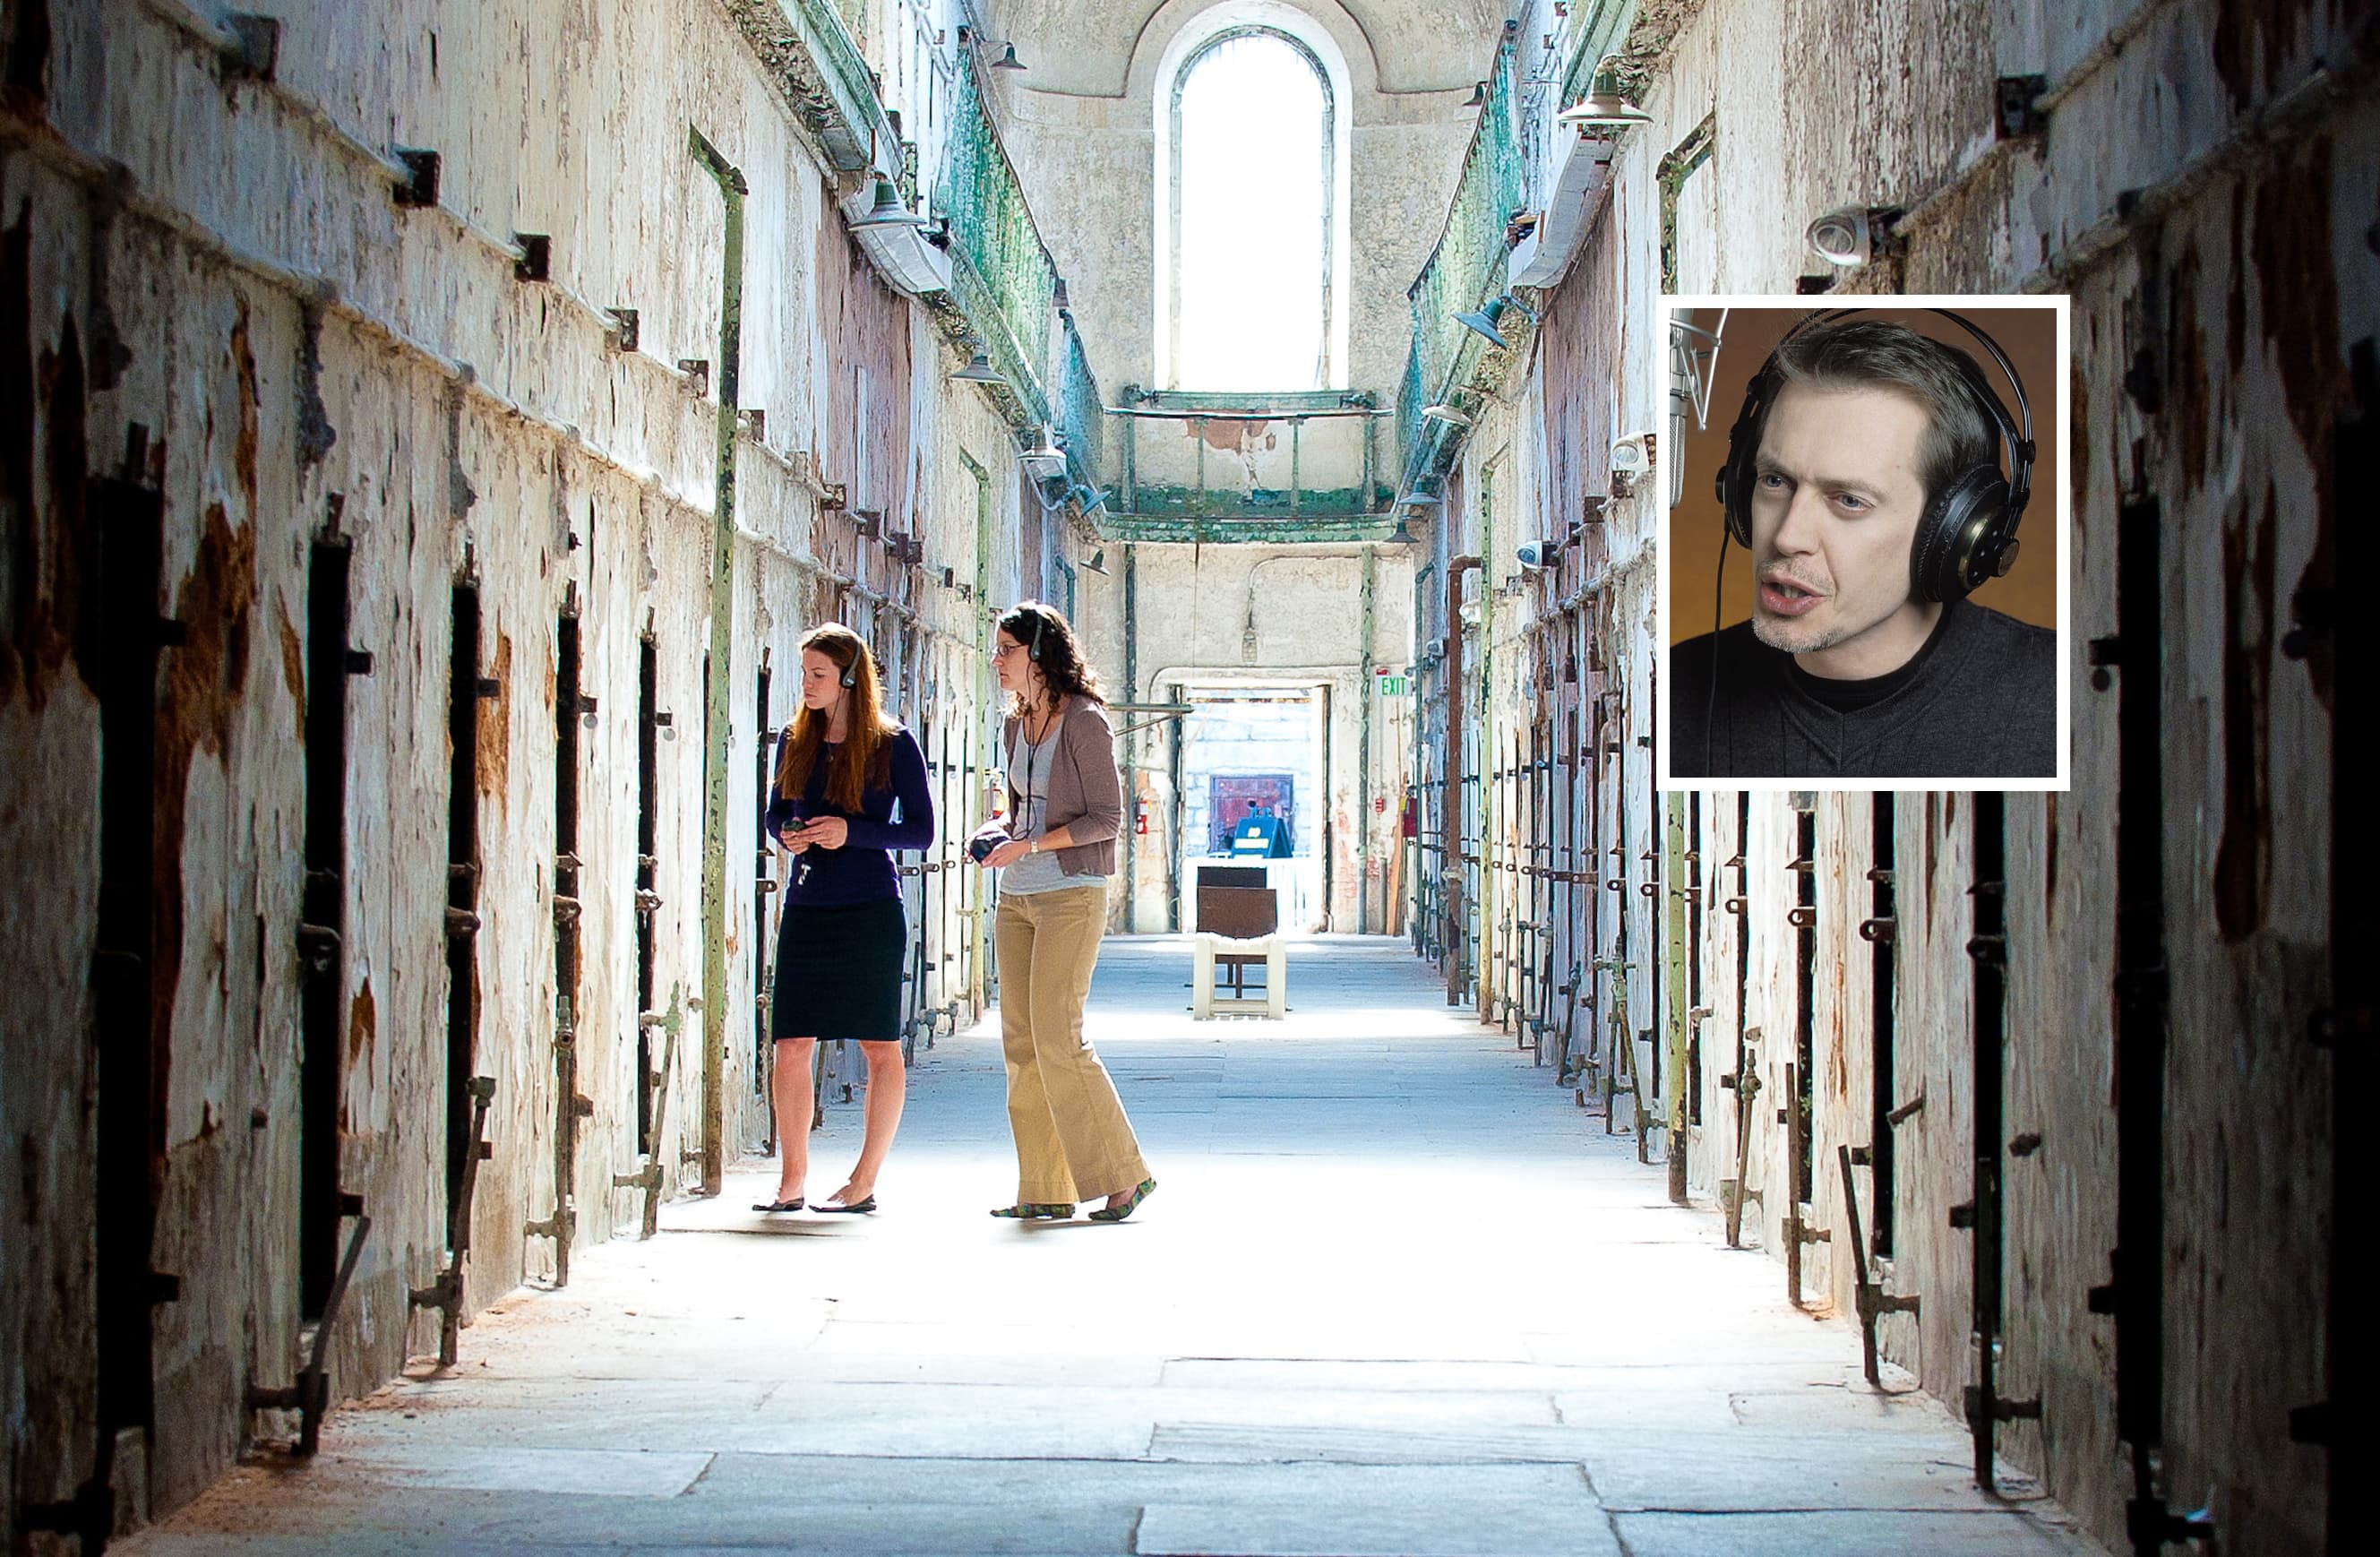 Steve Buscemi tour at Eastern State Pentitentiary